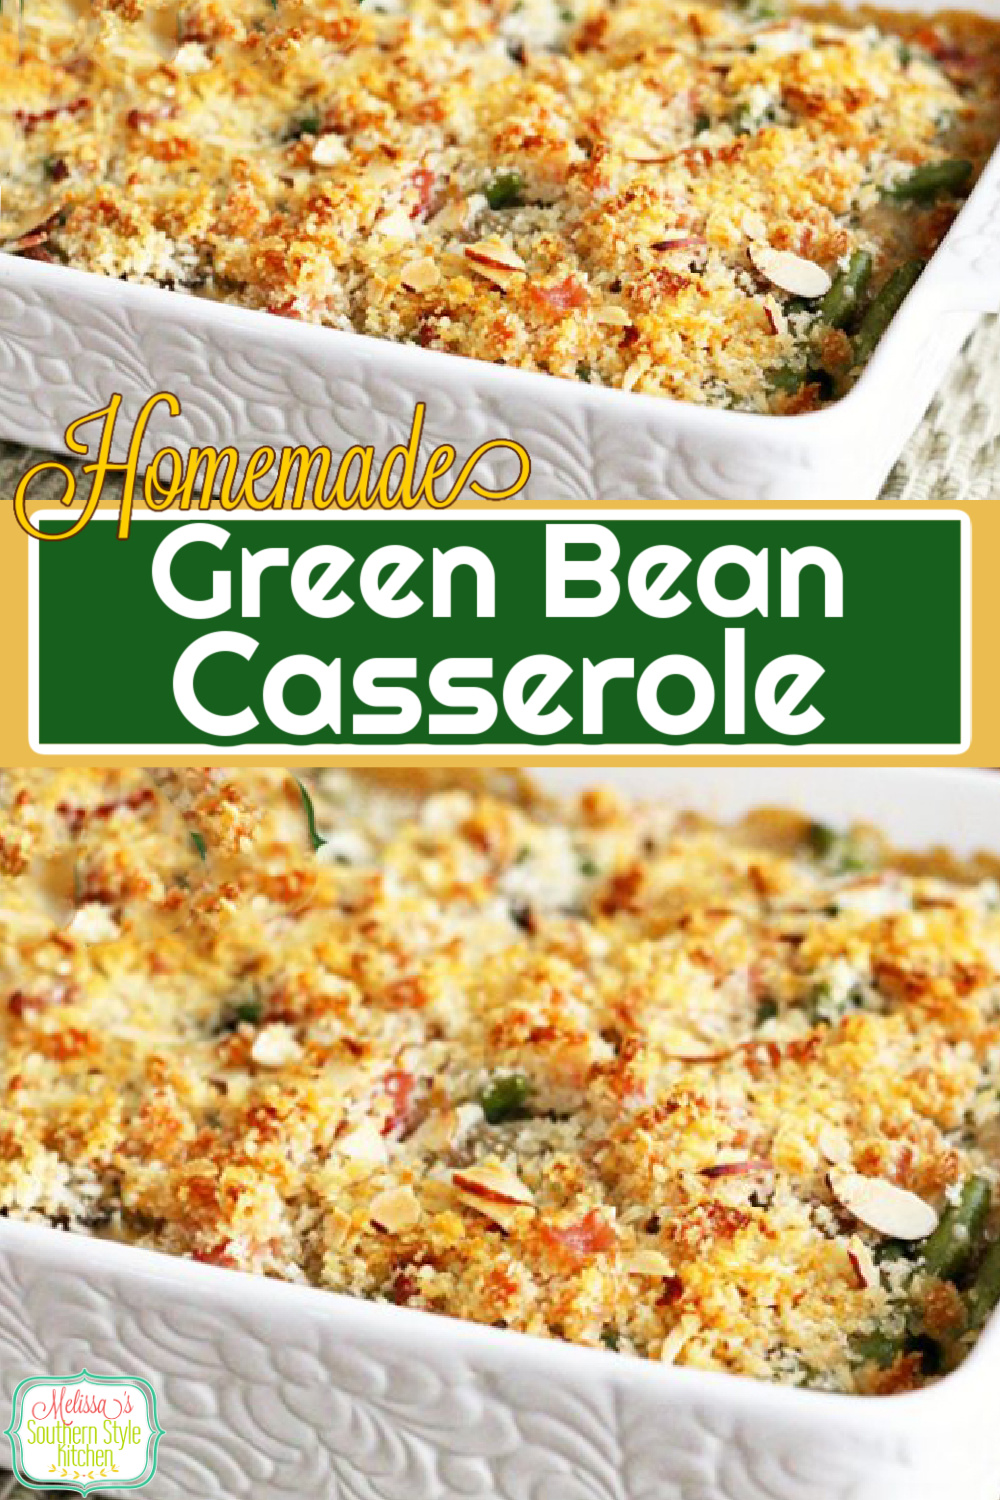 This Homemade Green Bean Casserole elevates a classic holiday side dish with a homemade sauce and BACON #greenbeancasserole #casseroles #holidaysidedishes #greenbeans #thanksgiving #dinnerideas #dinner #bacon #bestcasseroles #southernfood #southernrecipes via @melissasssk